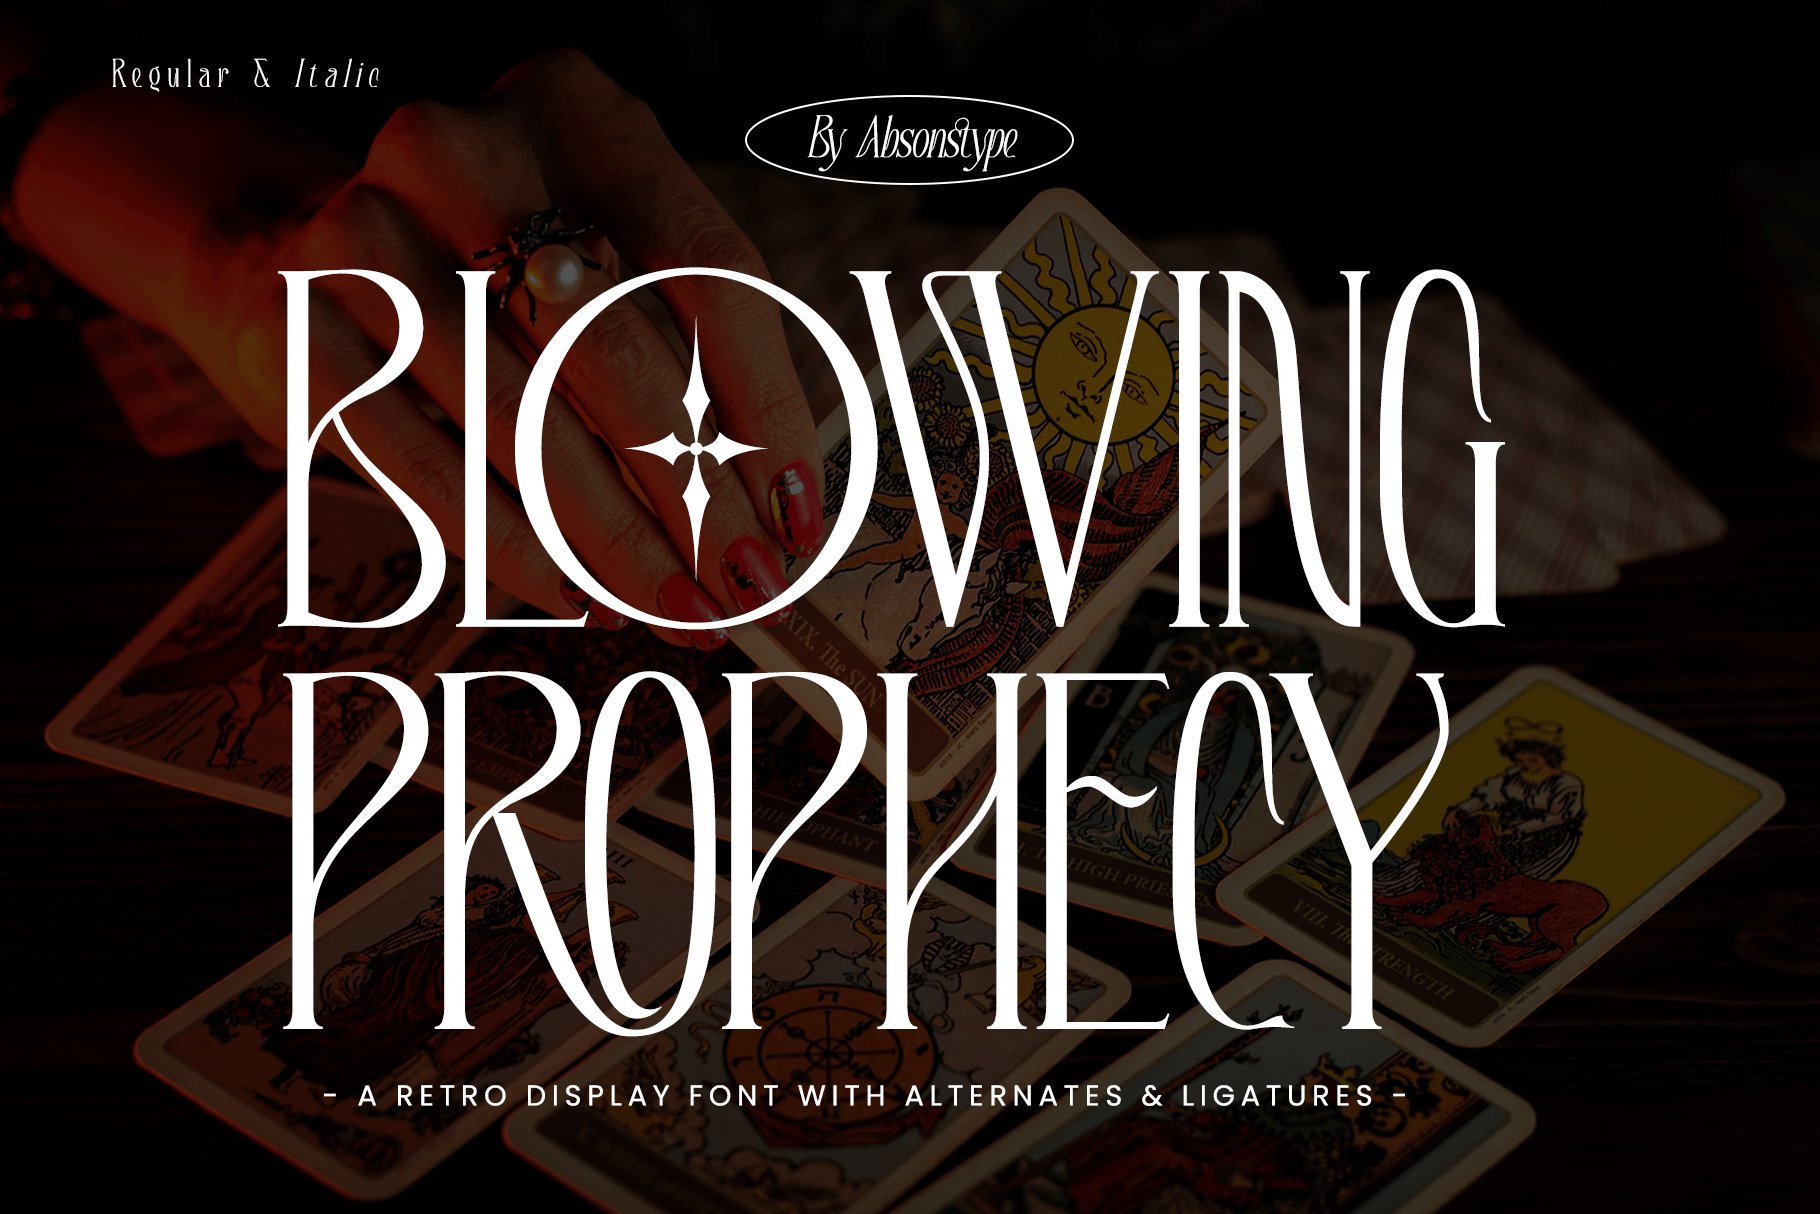 BLOWING PROPHECY